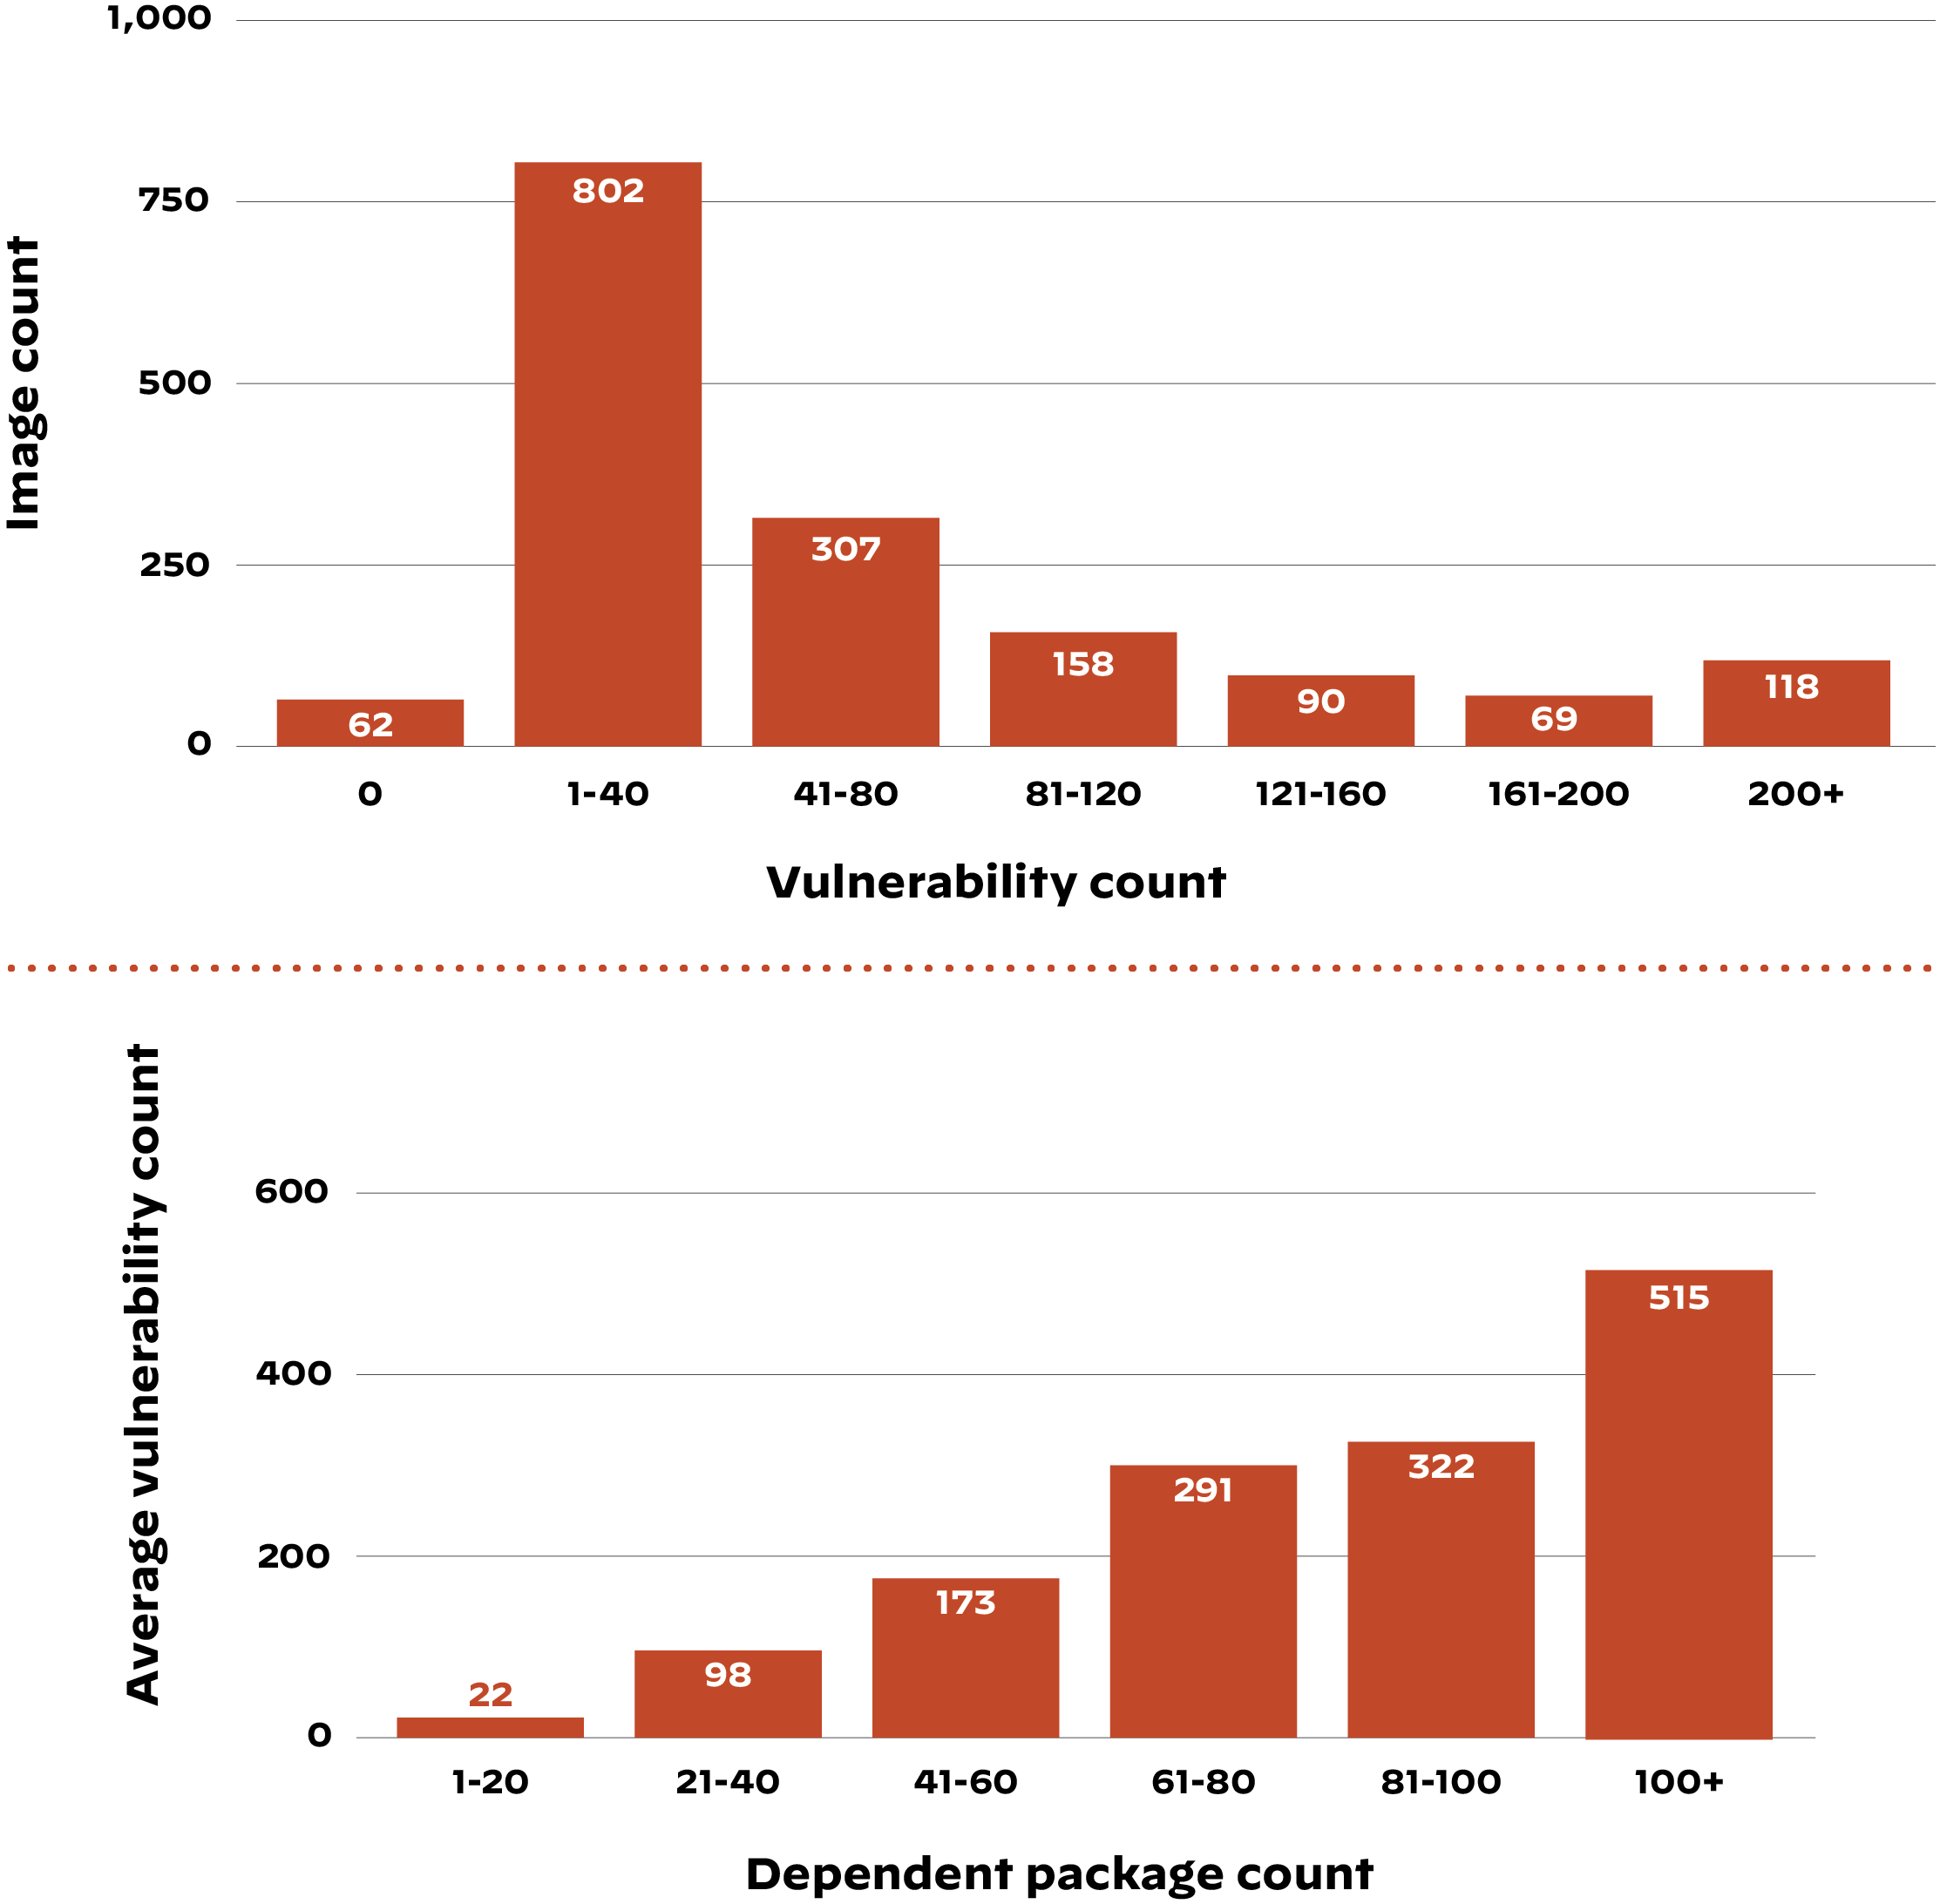 Vulnerabilities in widely used container images